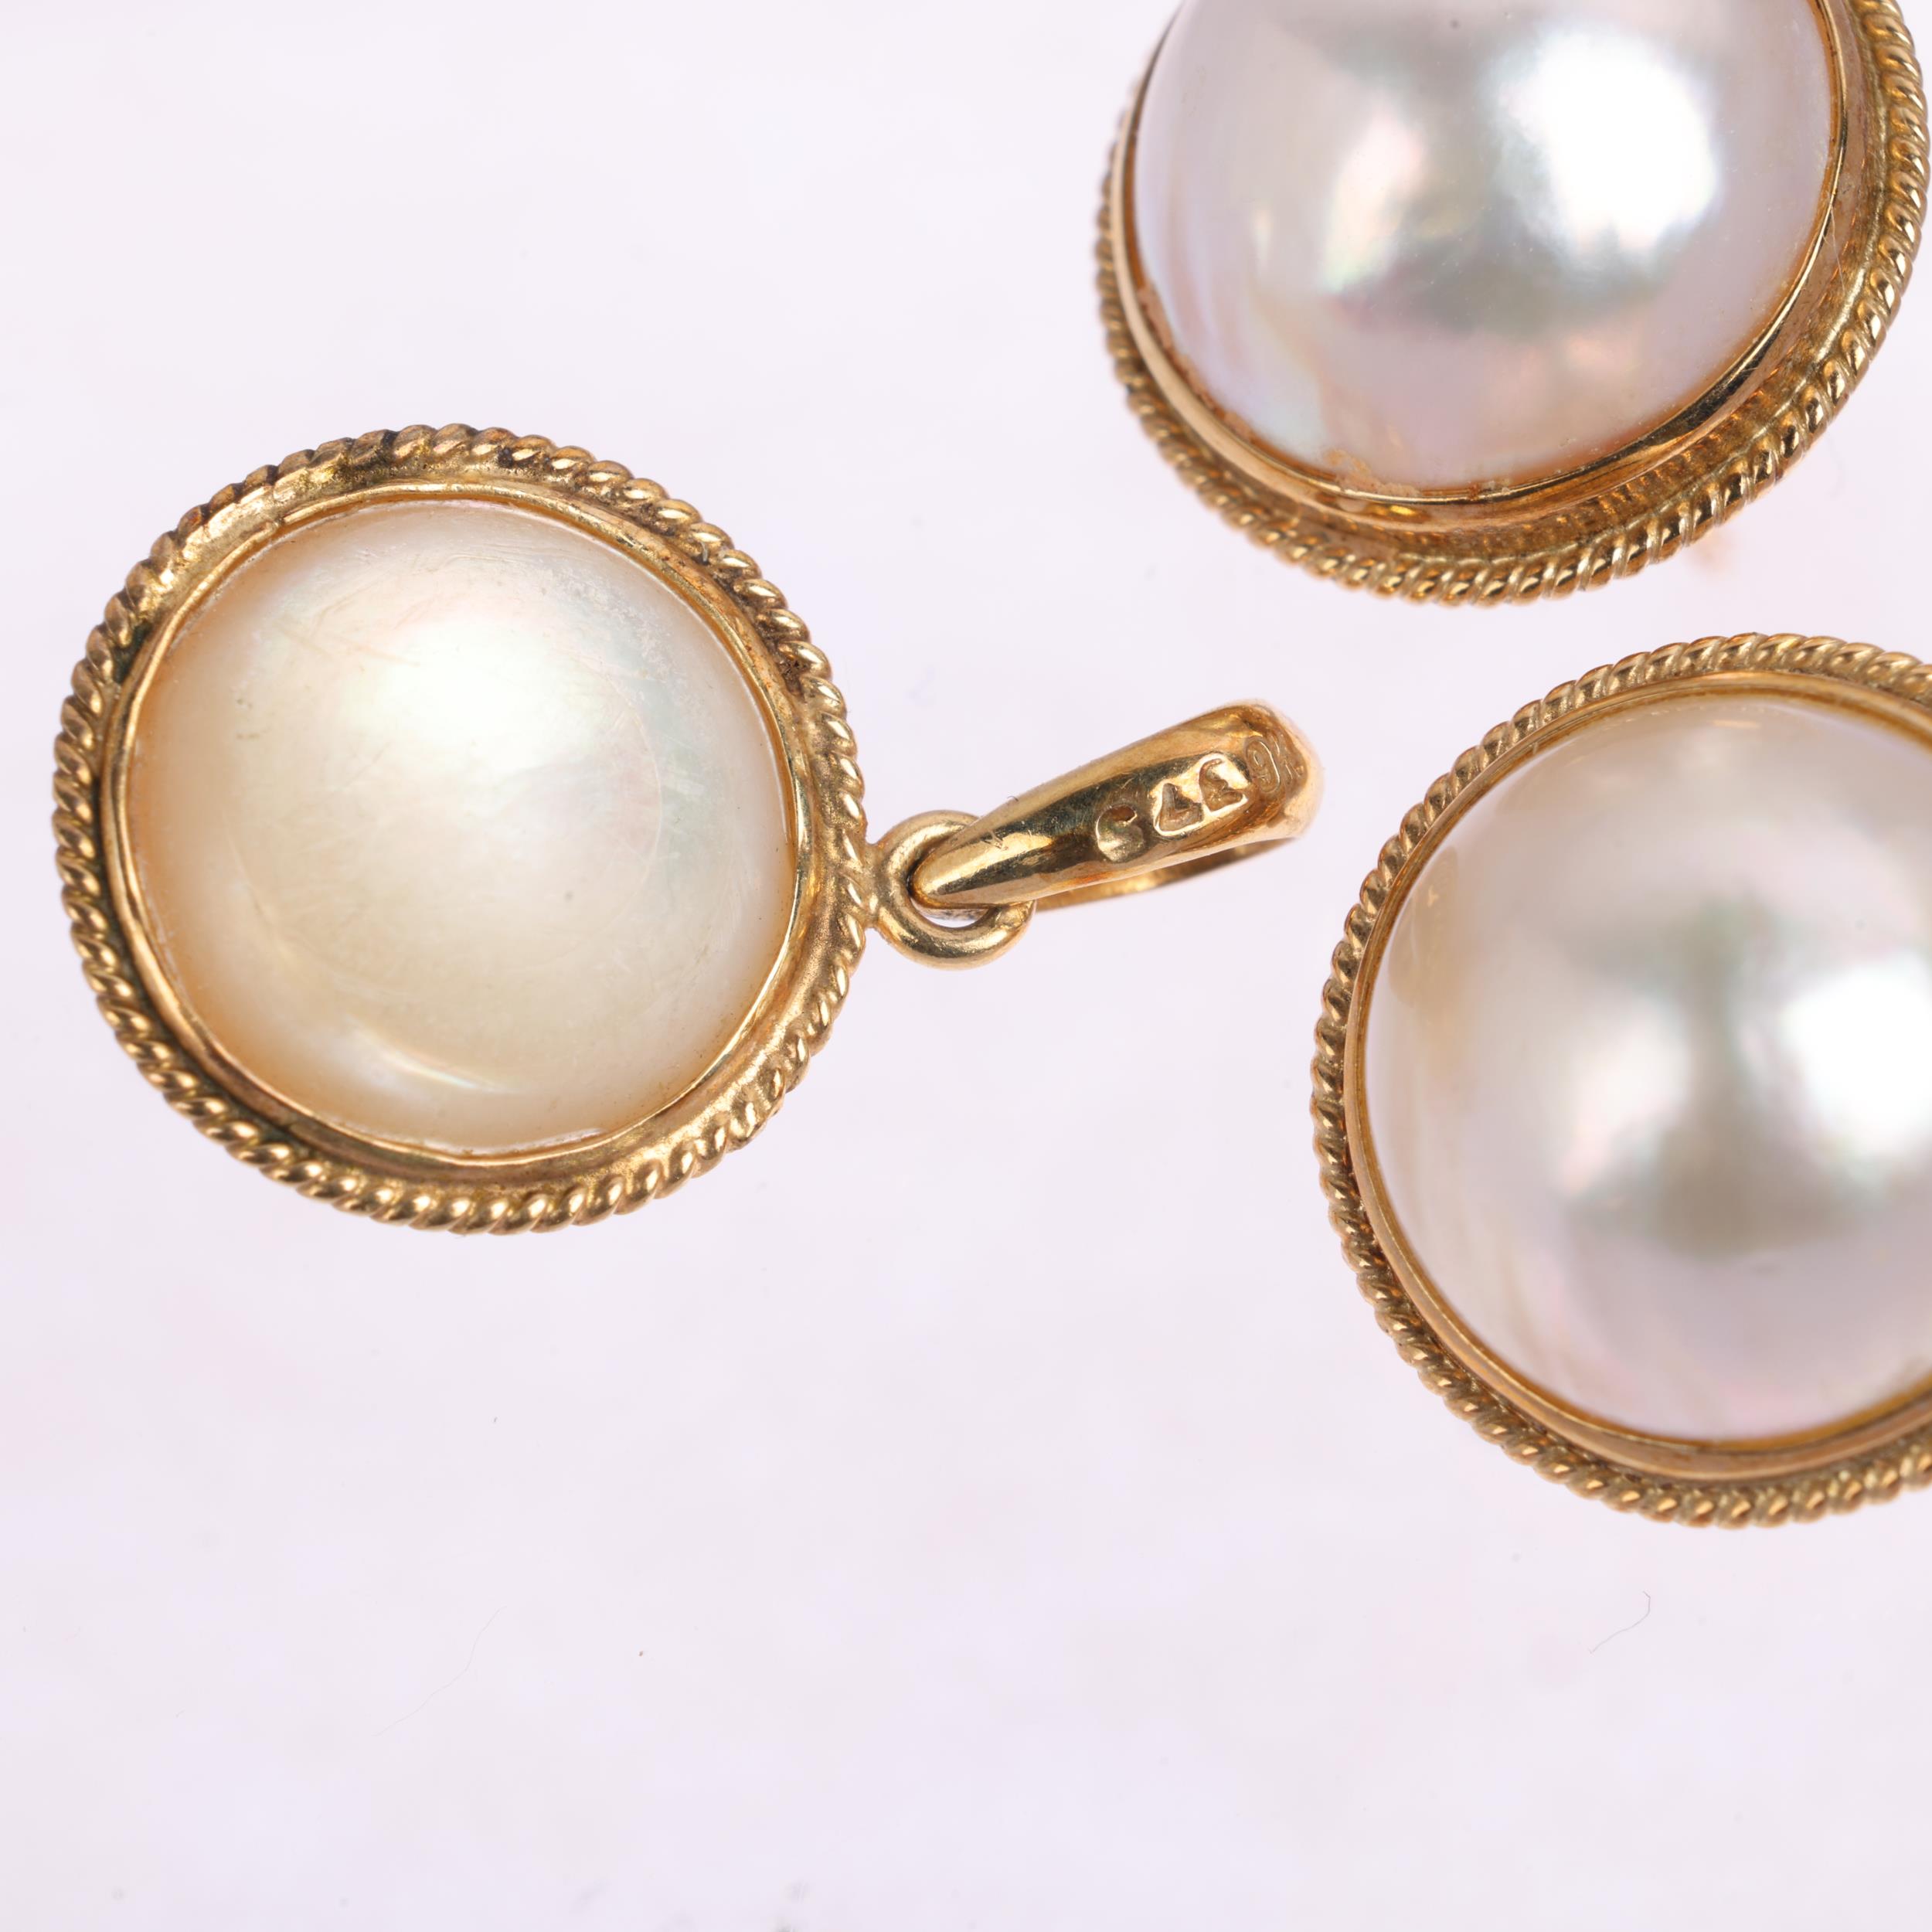 A 9ct gold Mabe pearl pendant and earring set, pendant 20mm, stud earrings 13.3mm, 5g total (2) - Image 2 of 4